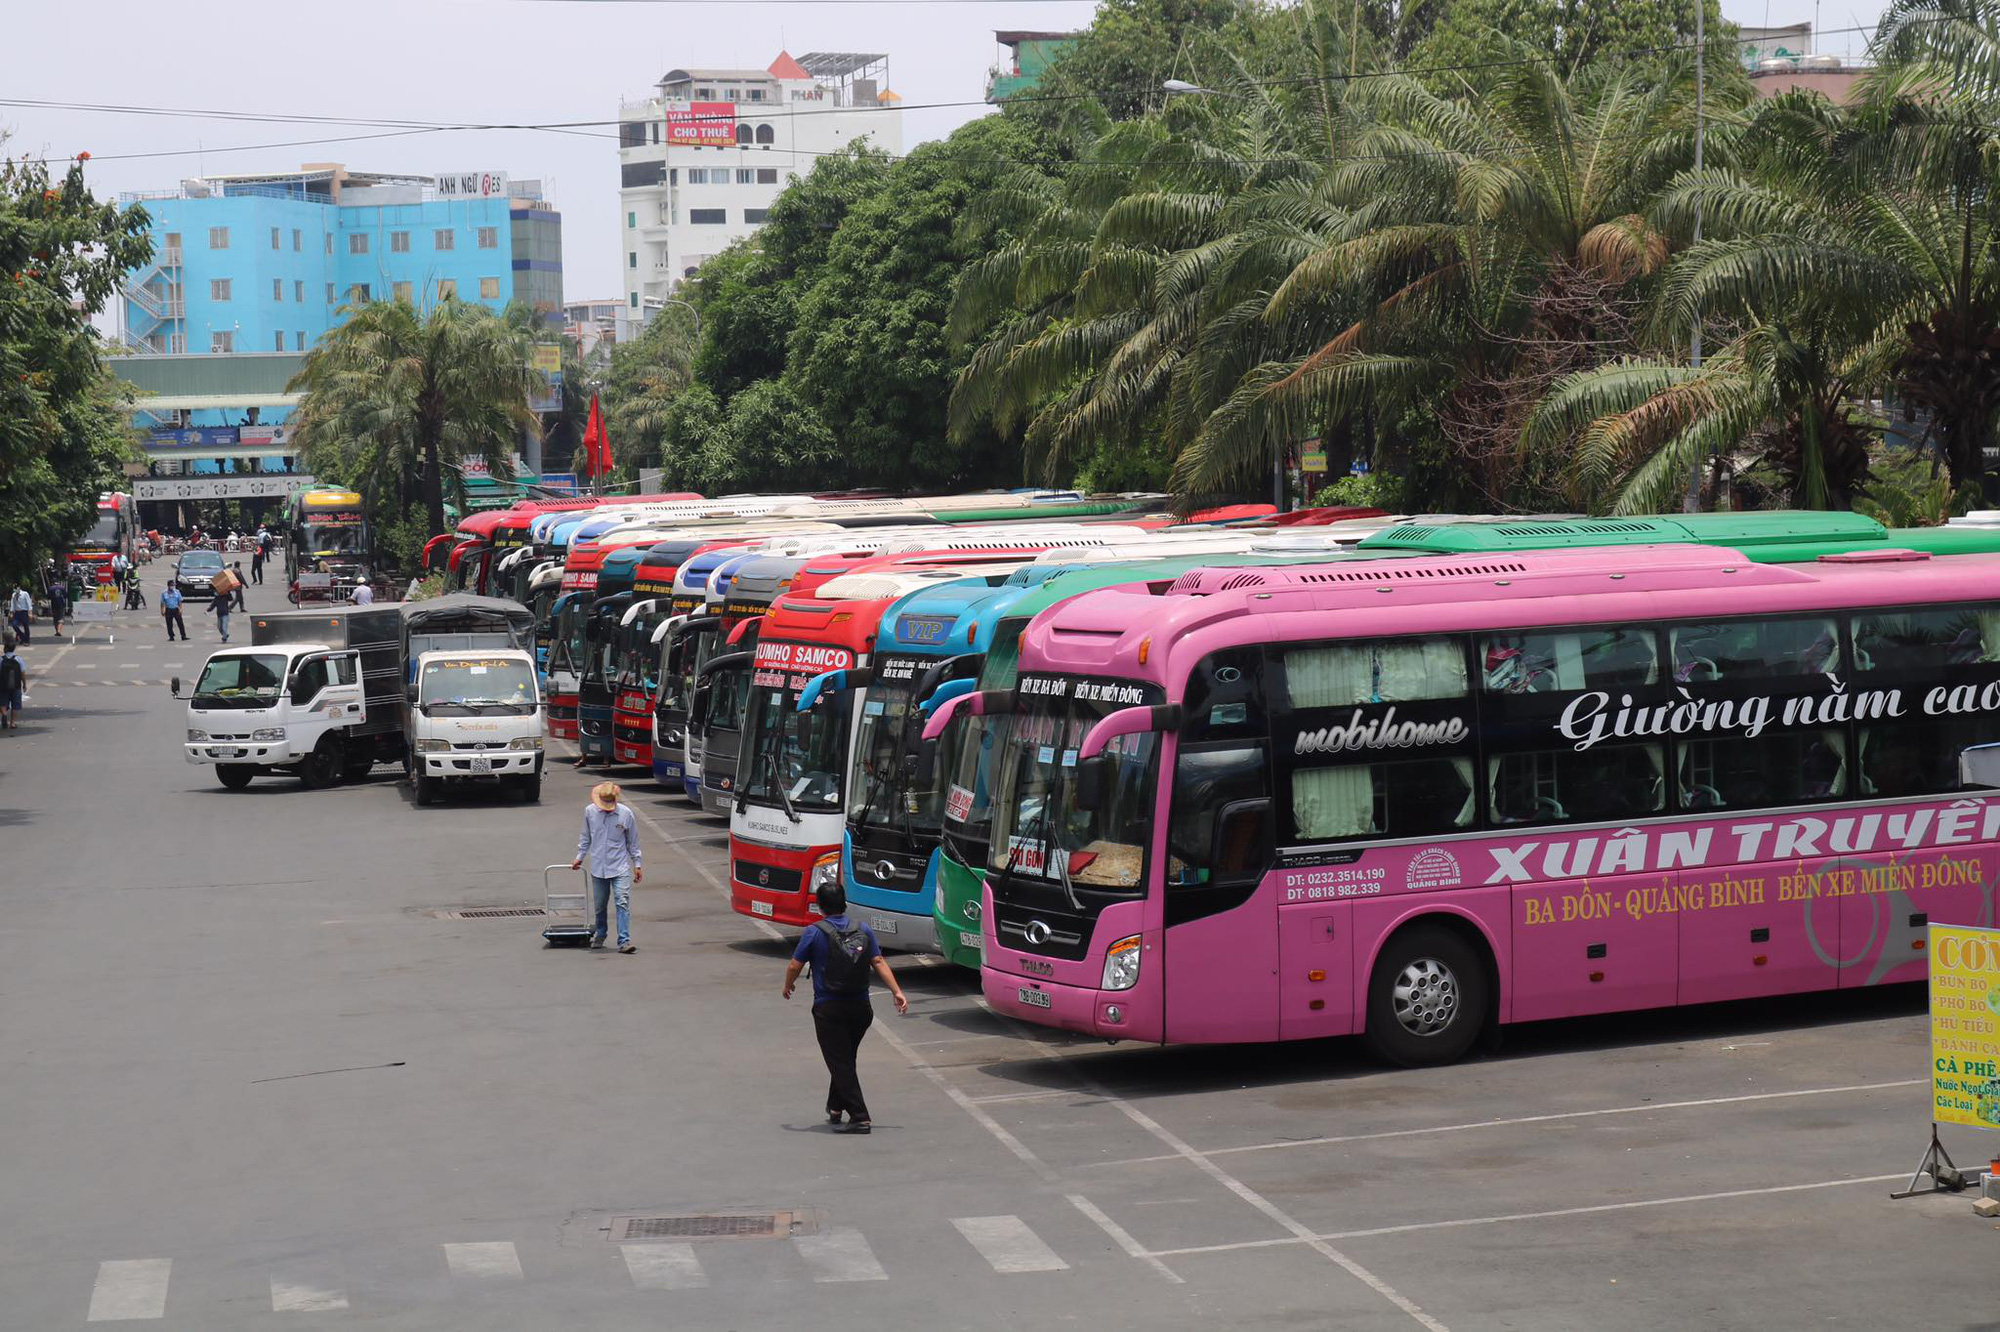 Long-haul buses come back on stream in Vietnam